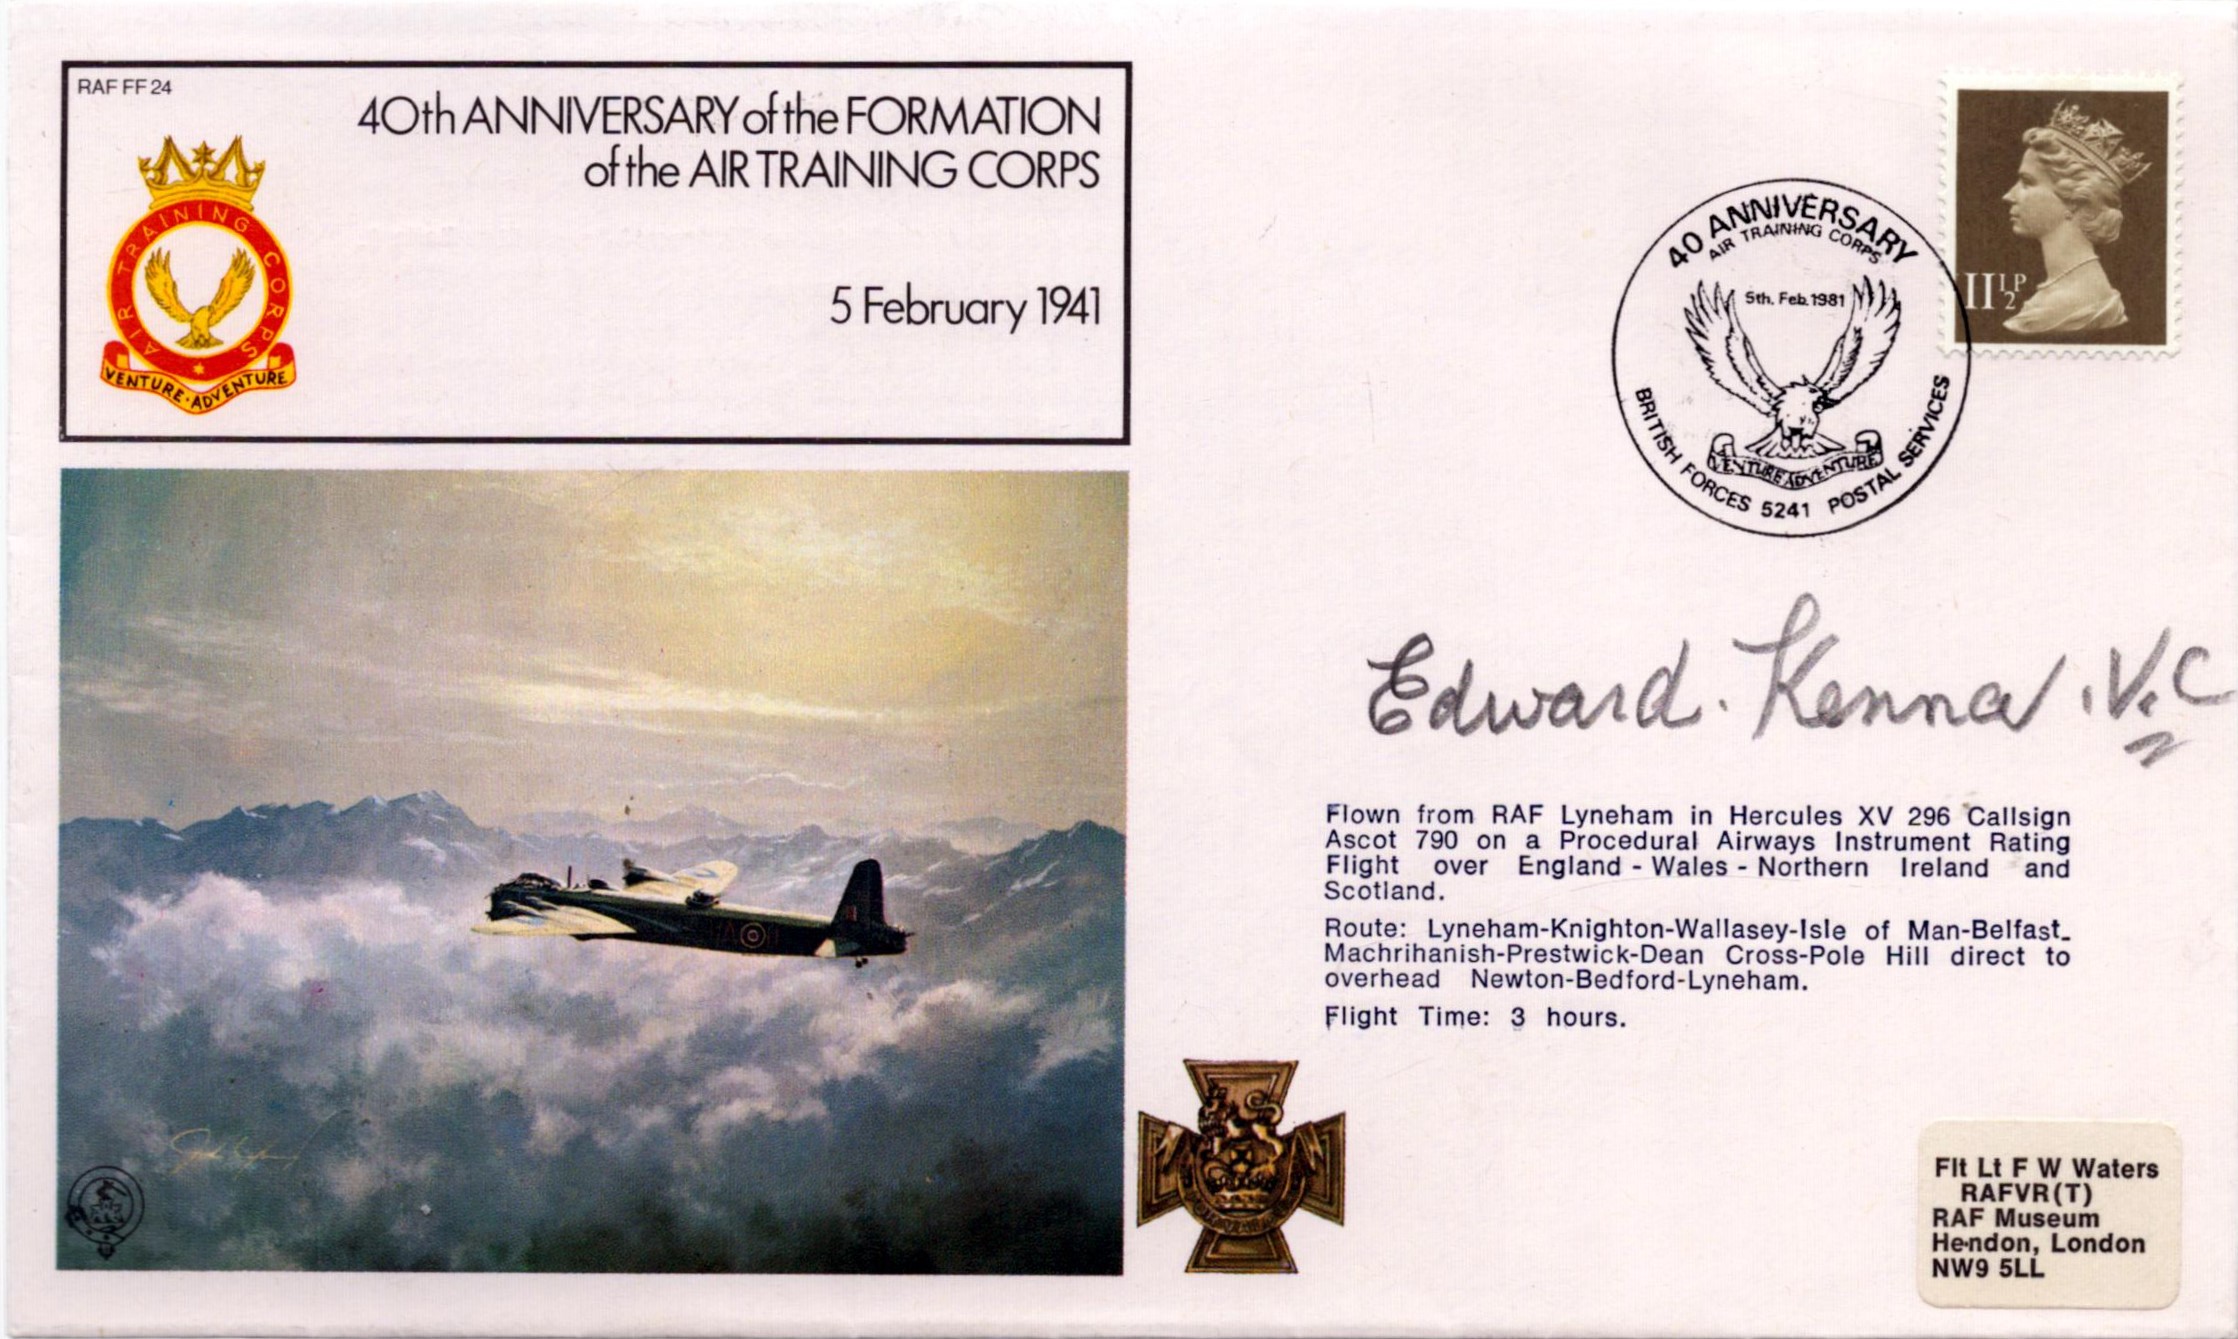 WWII Private Edward Kenna VC signed 40th Anniversary of the Formation of the Air Training Corps 5 - Image 3 of 3